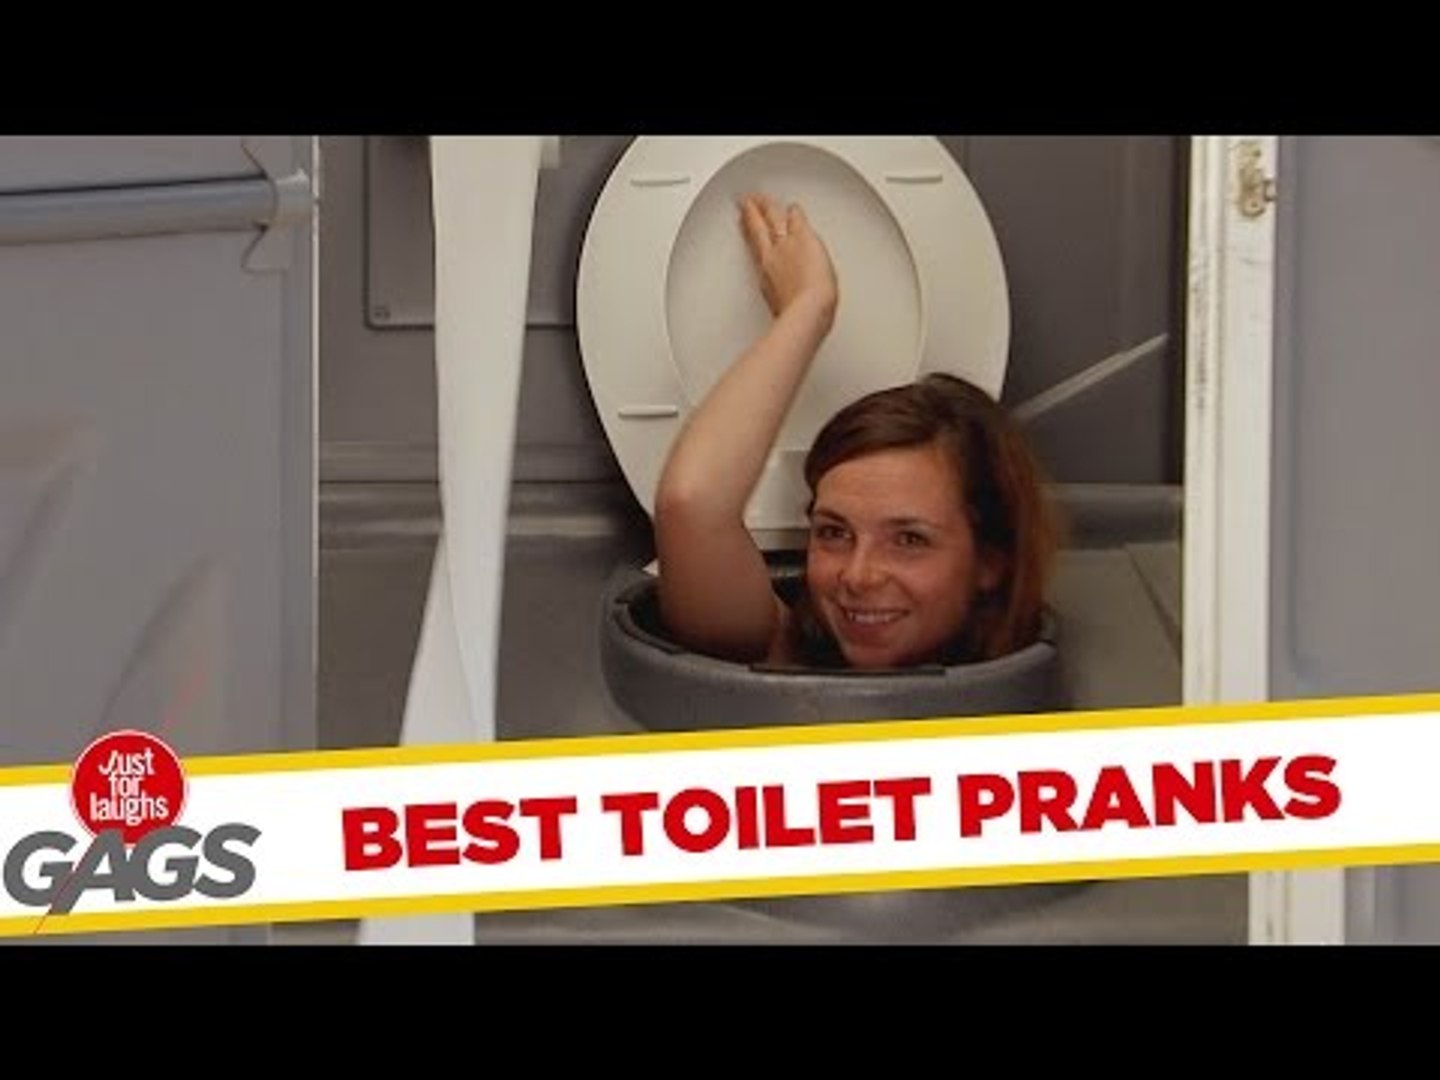 Best Public Toilets Pranks - Best of Just for Laughs Gags